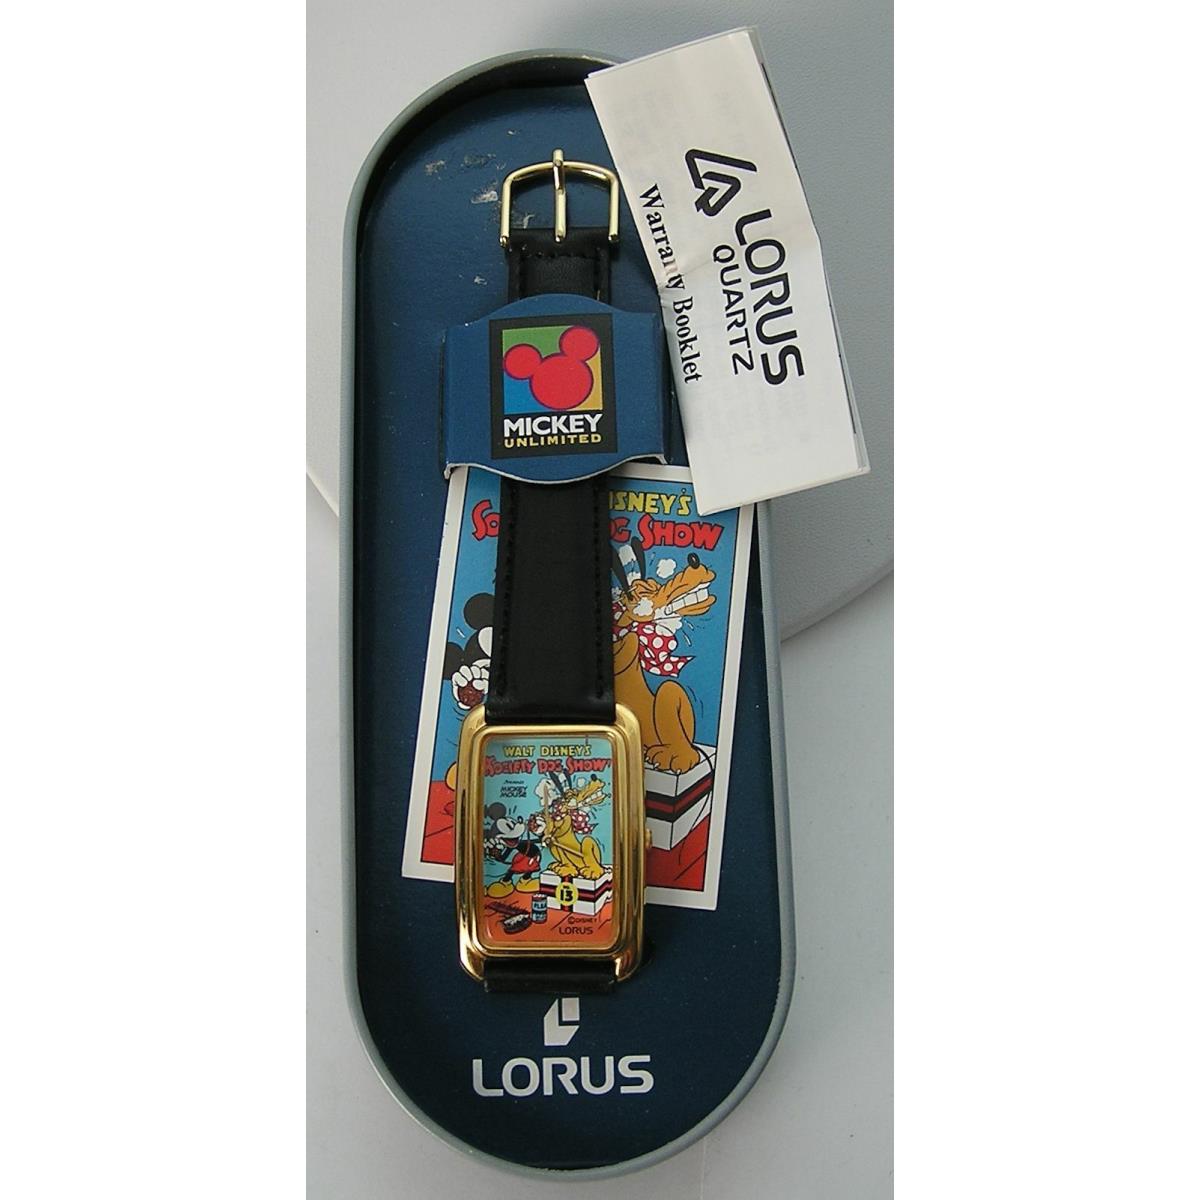 Awesome Nos Lorus Mickey Unlimited Society Dog Show Pluto Tank Style Watch W/tin